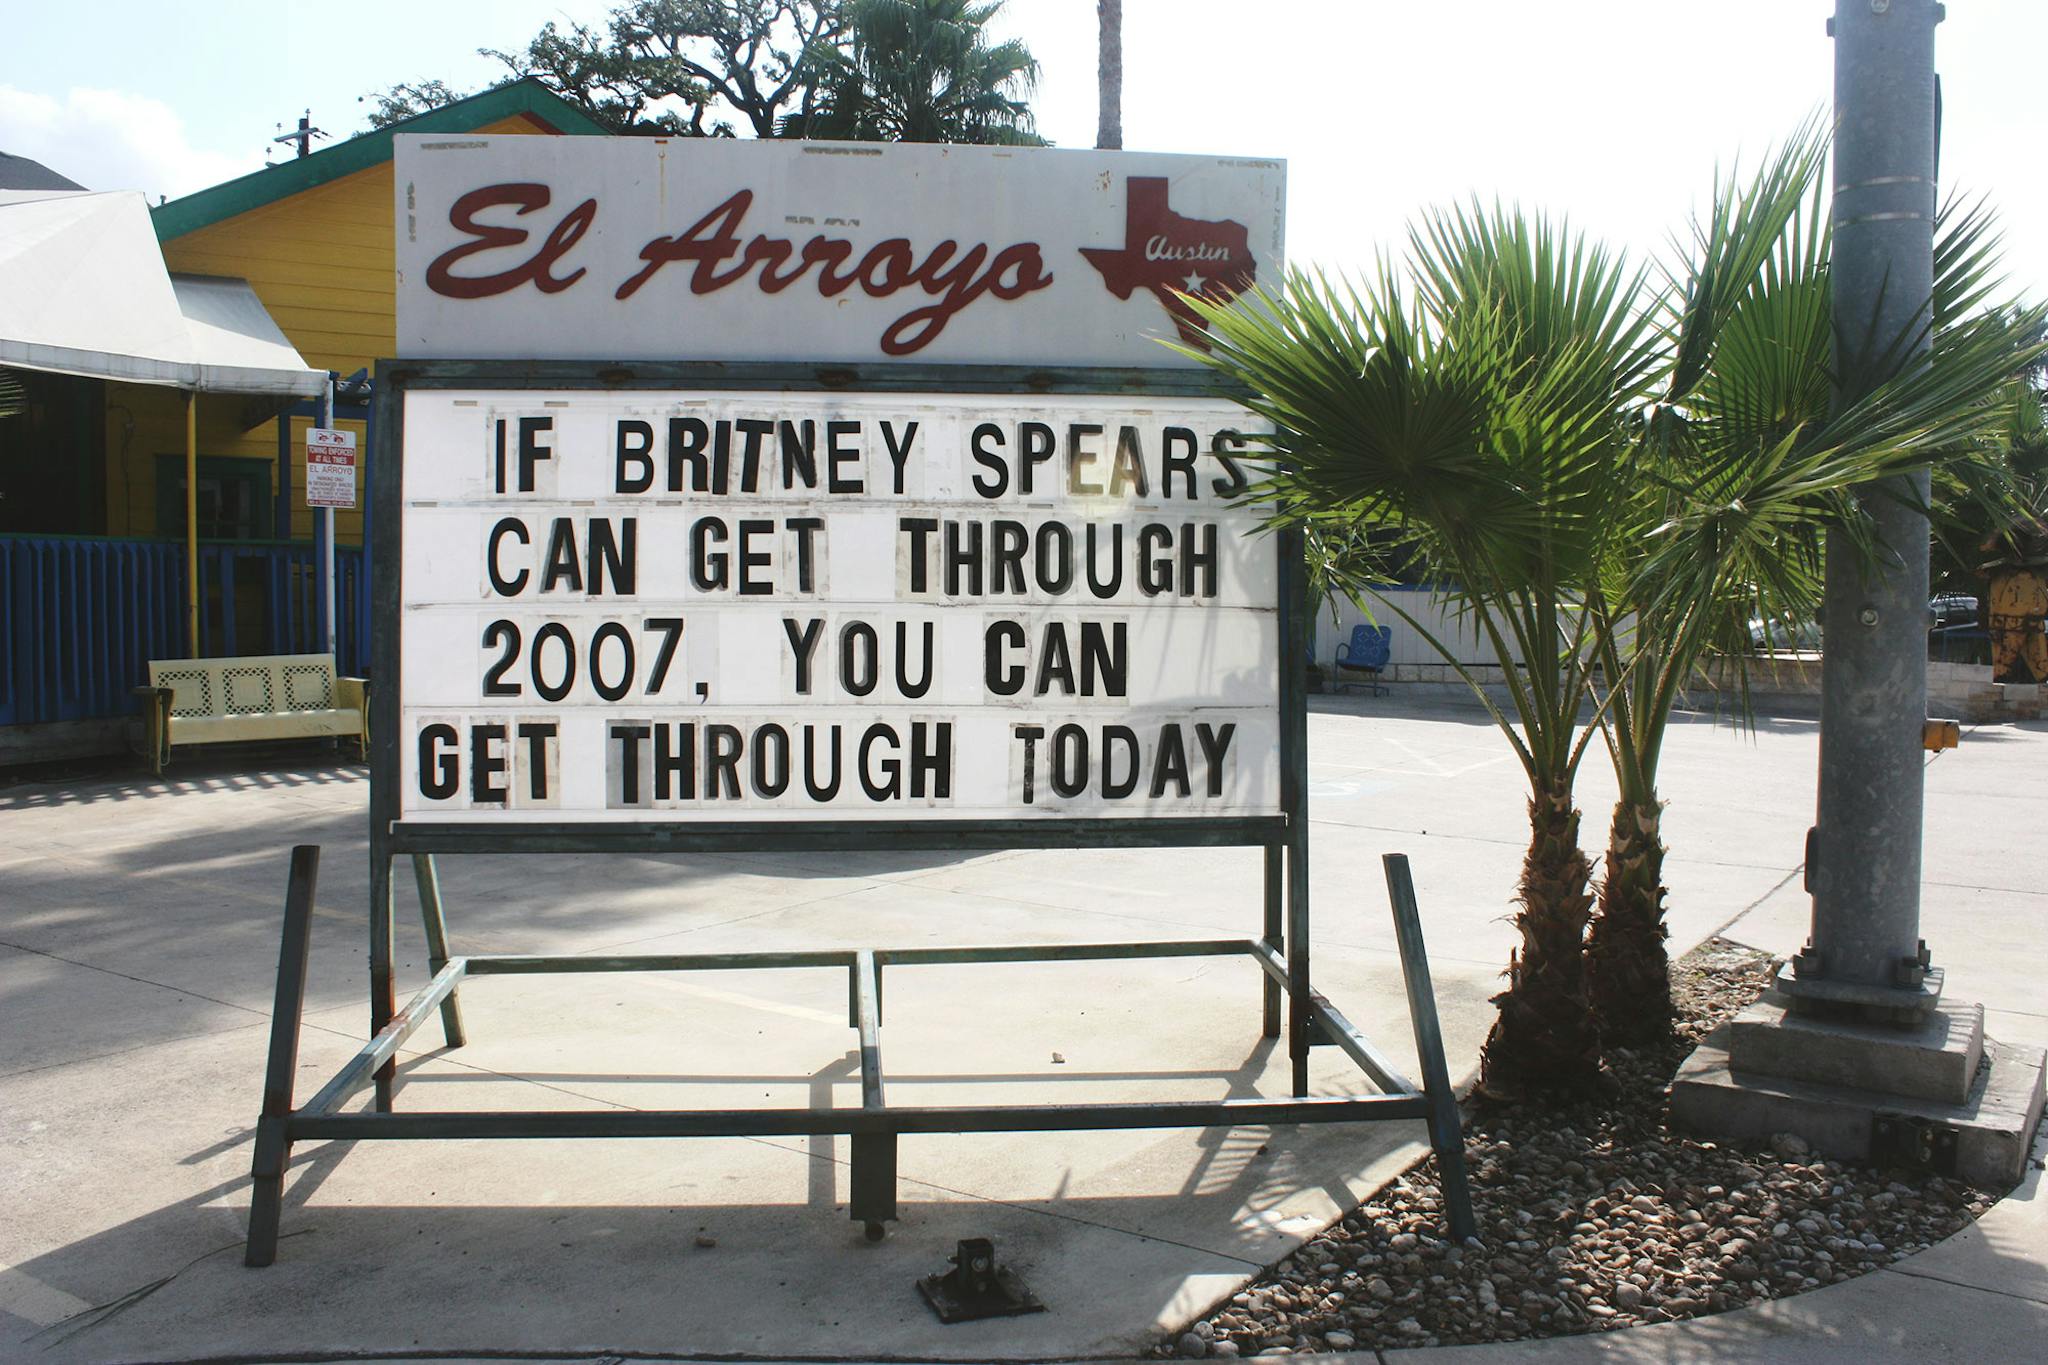 El Arroyo sign says If Britney Spears can get through 2007, you can get through today.